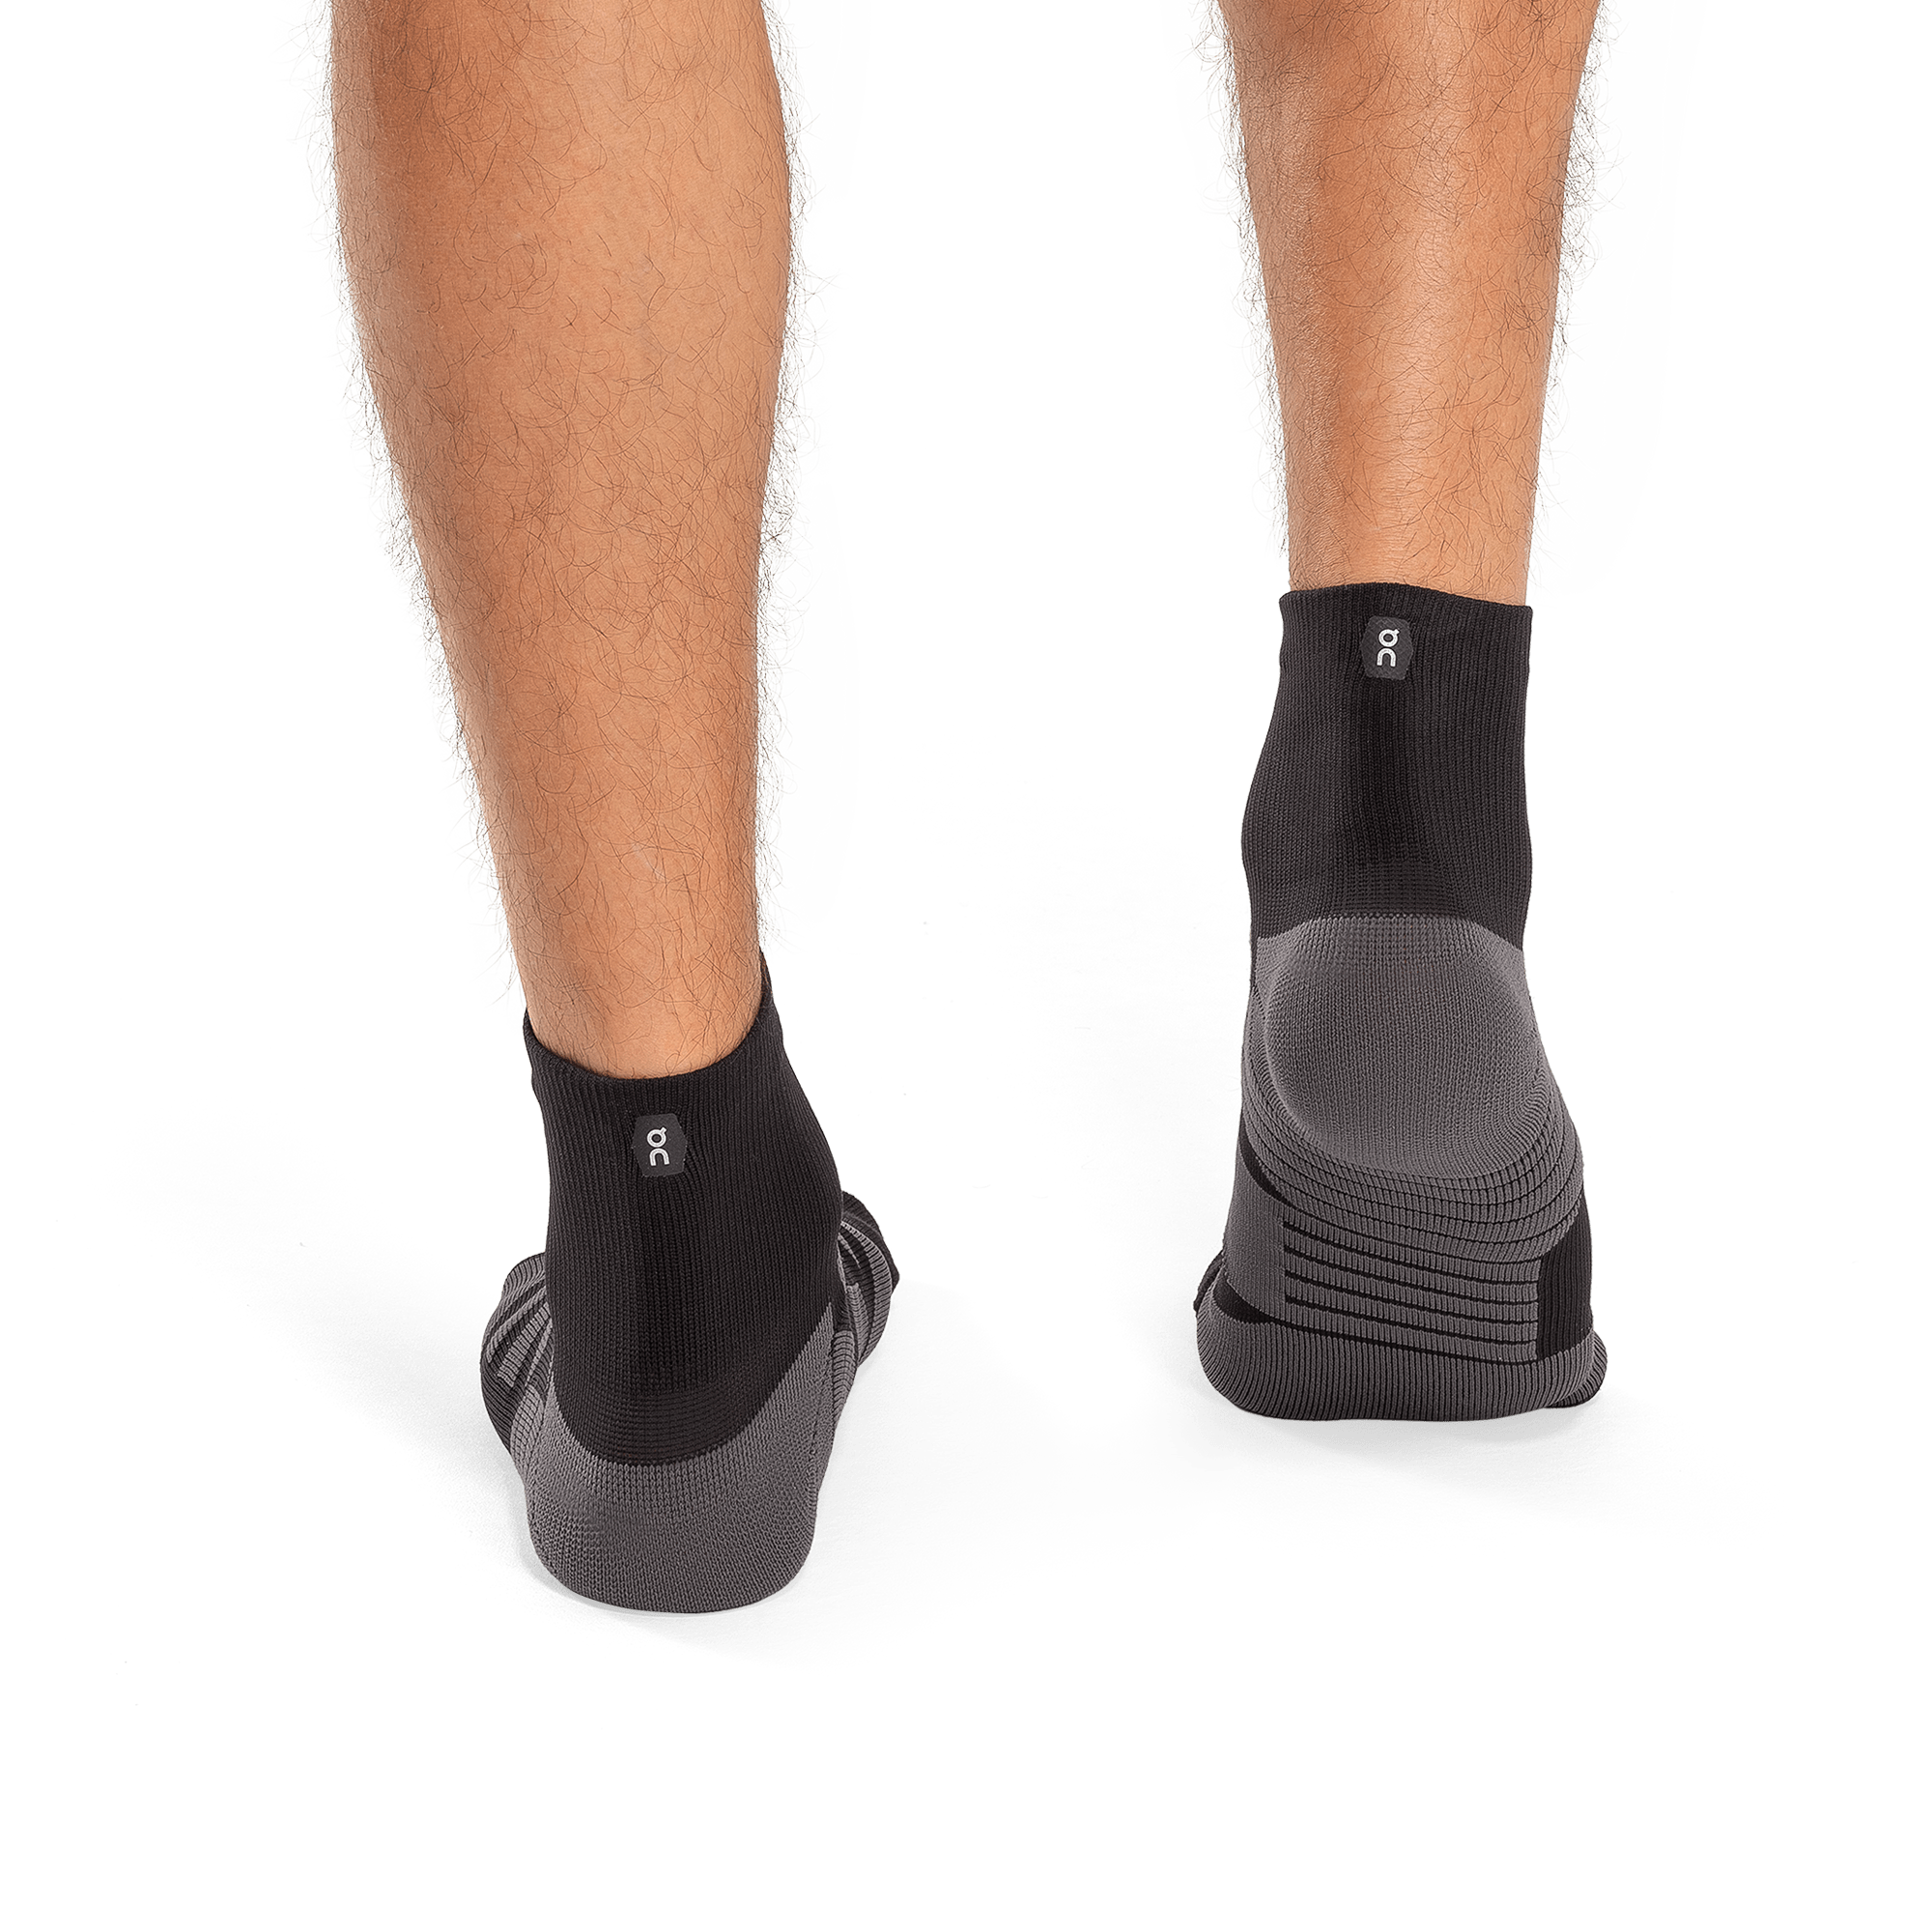 On Calcetines Running Hombre - Performance Mid - Black & Shadow